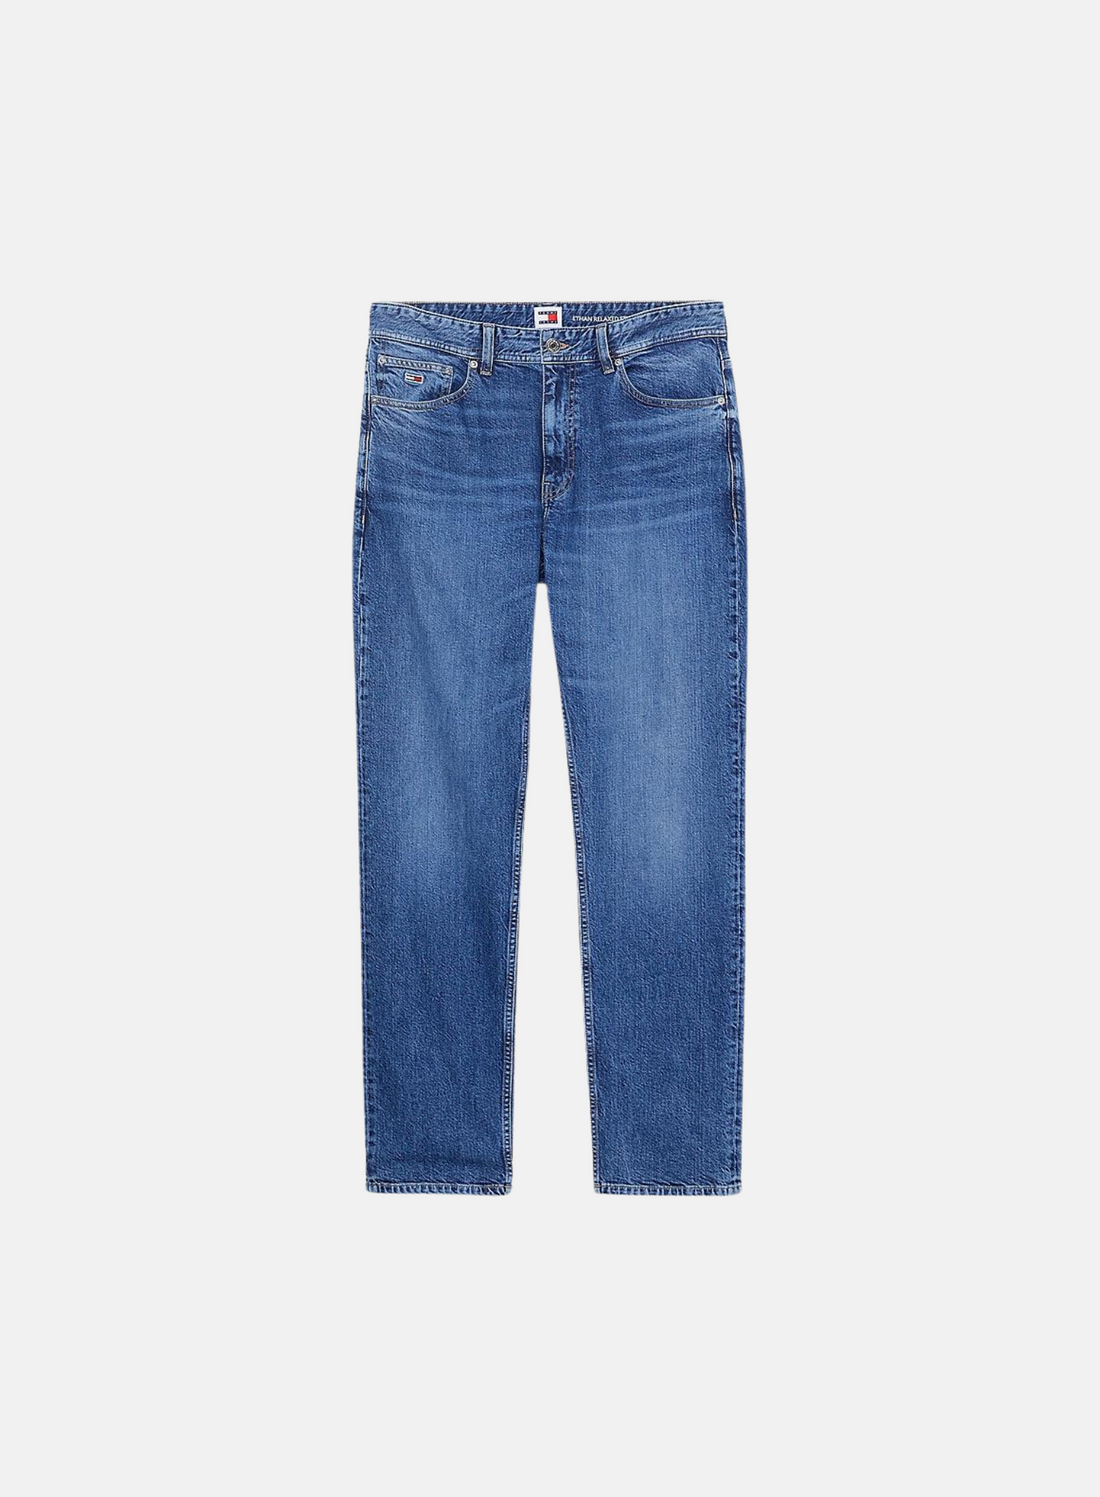 Tommy Jeans Ethan Relaxed Straight Dark Jeans - Hympala Store 